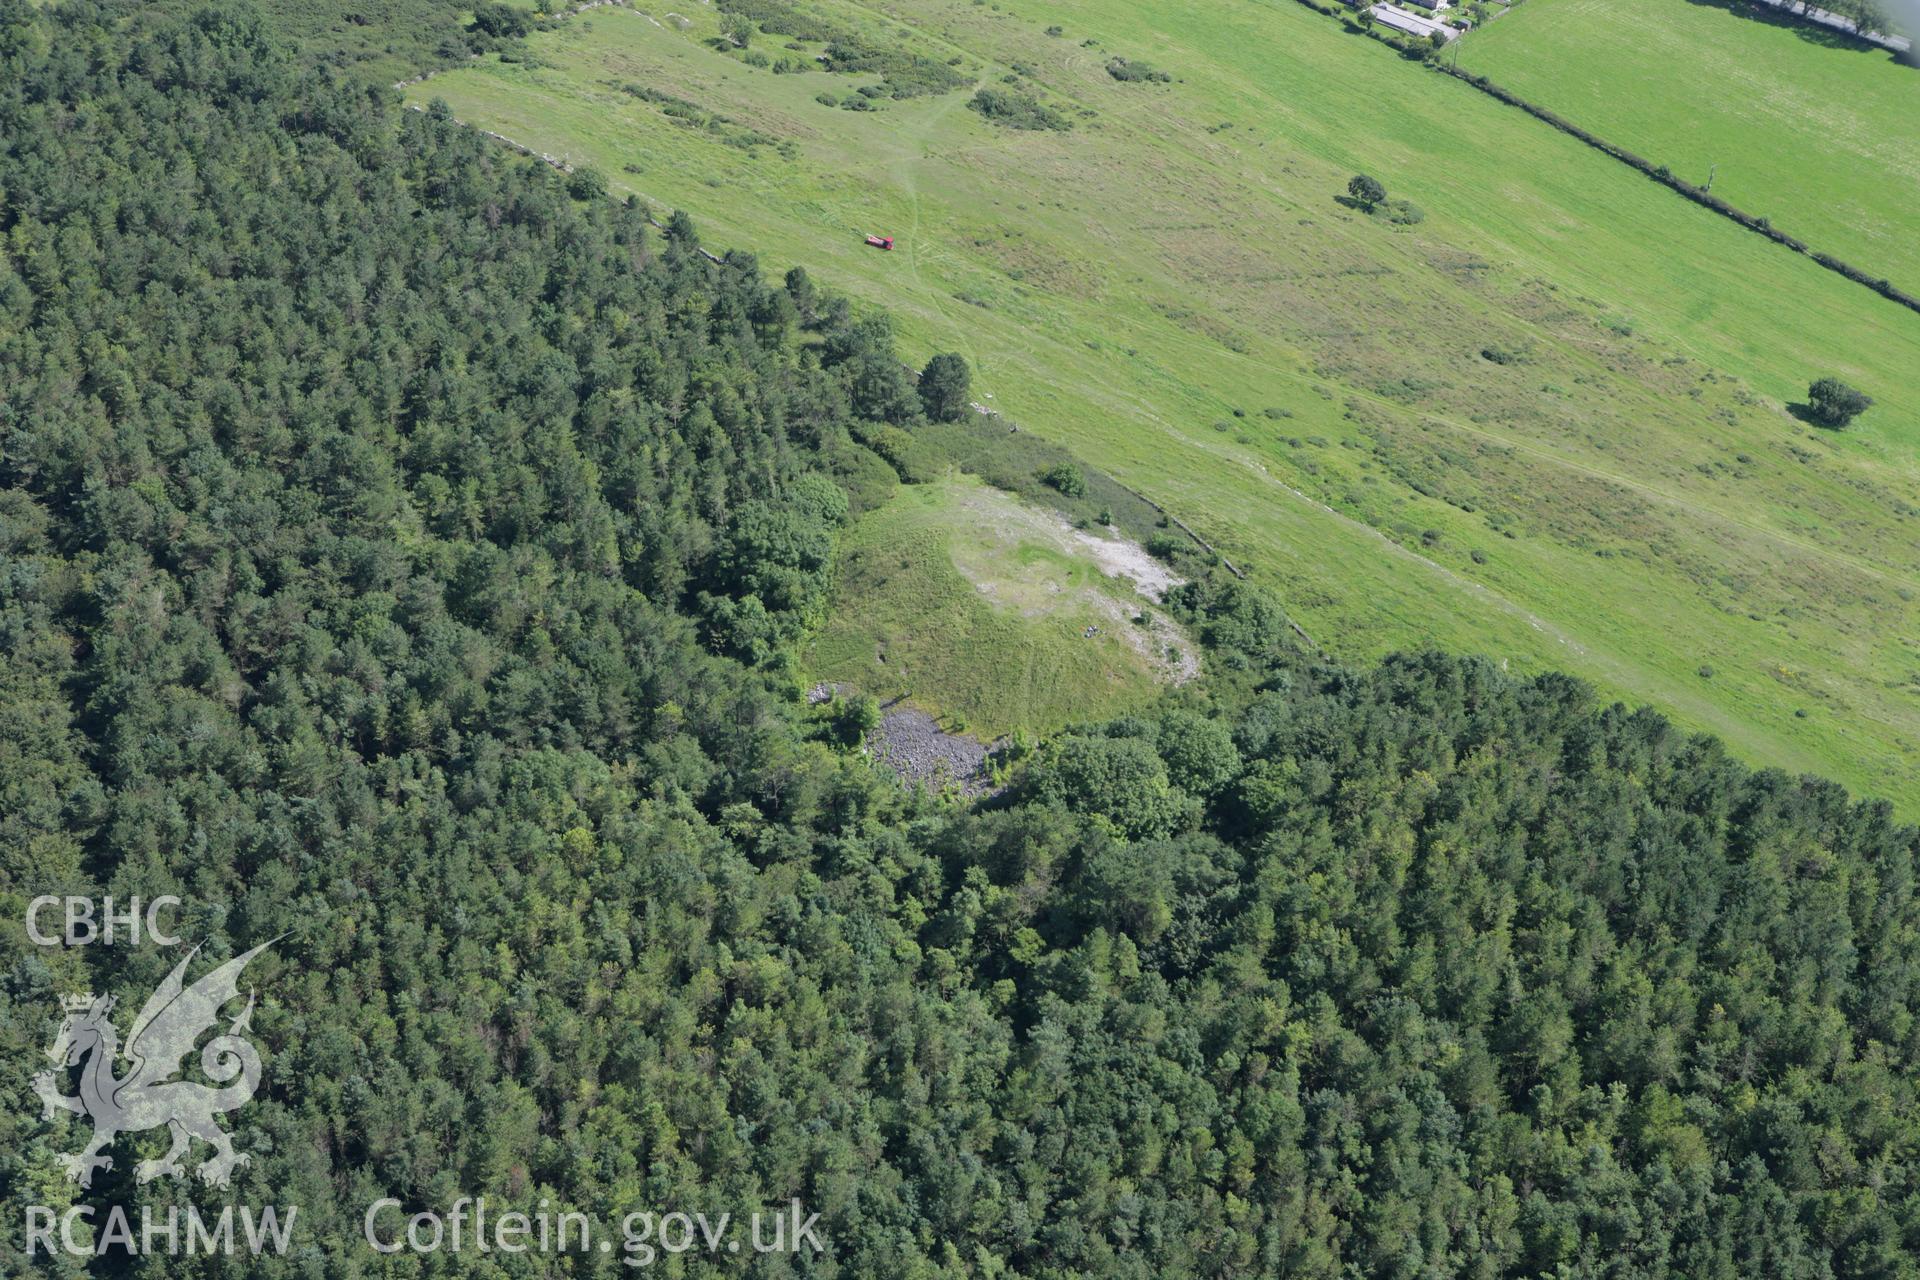 RCAHMW colour oblique aerial photograph of Gop Cairn. Taken on 31 July 2007 by Toby Driver